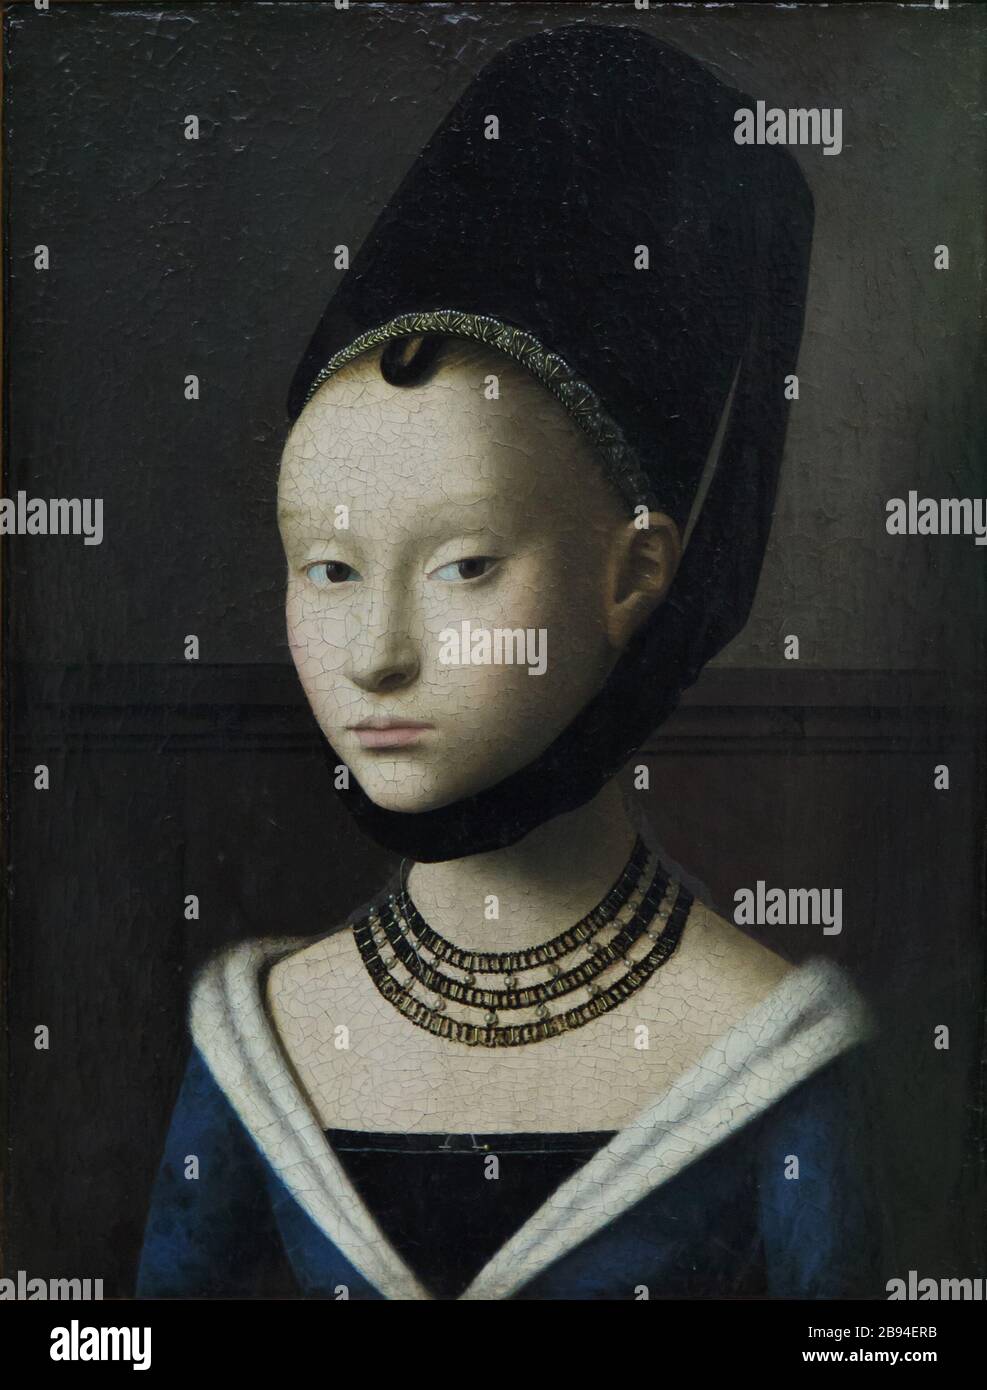 Painting 'Portrait of a Young Girl' by Early Netherlandish Renaissance painter Petrus Christus (1470) on display in the Berliner Gemäldegalerie (Berlin Picture Gallery) in Berlin, Germany. Stock Photo